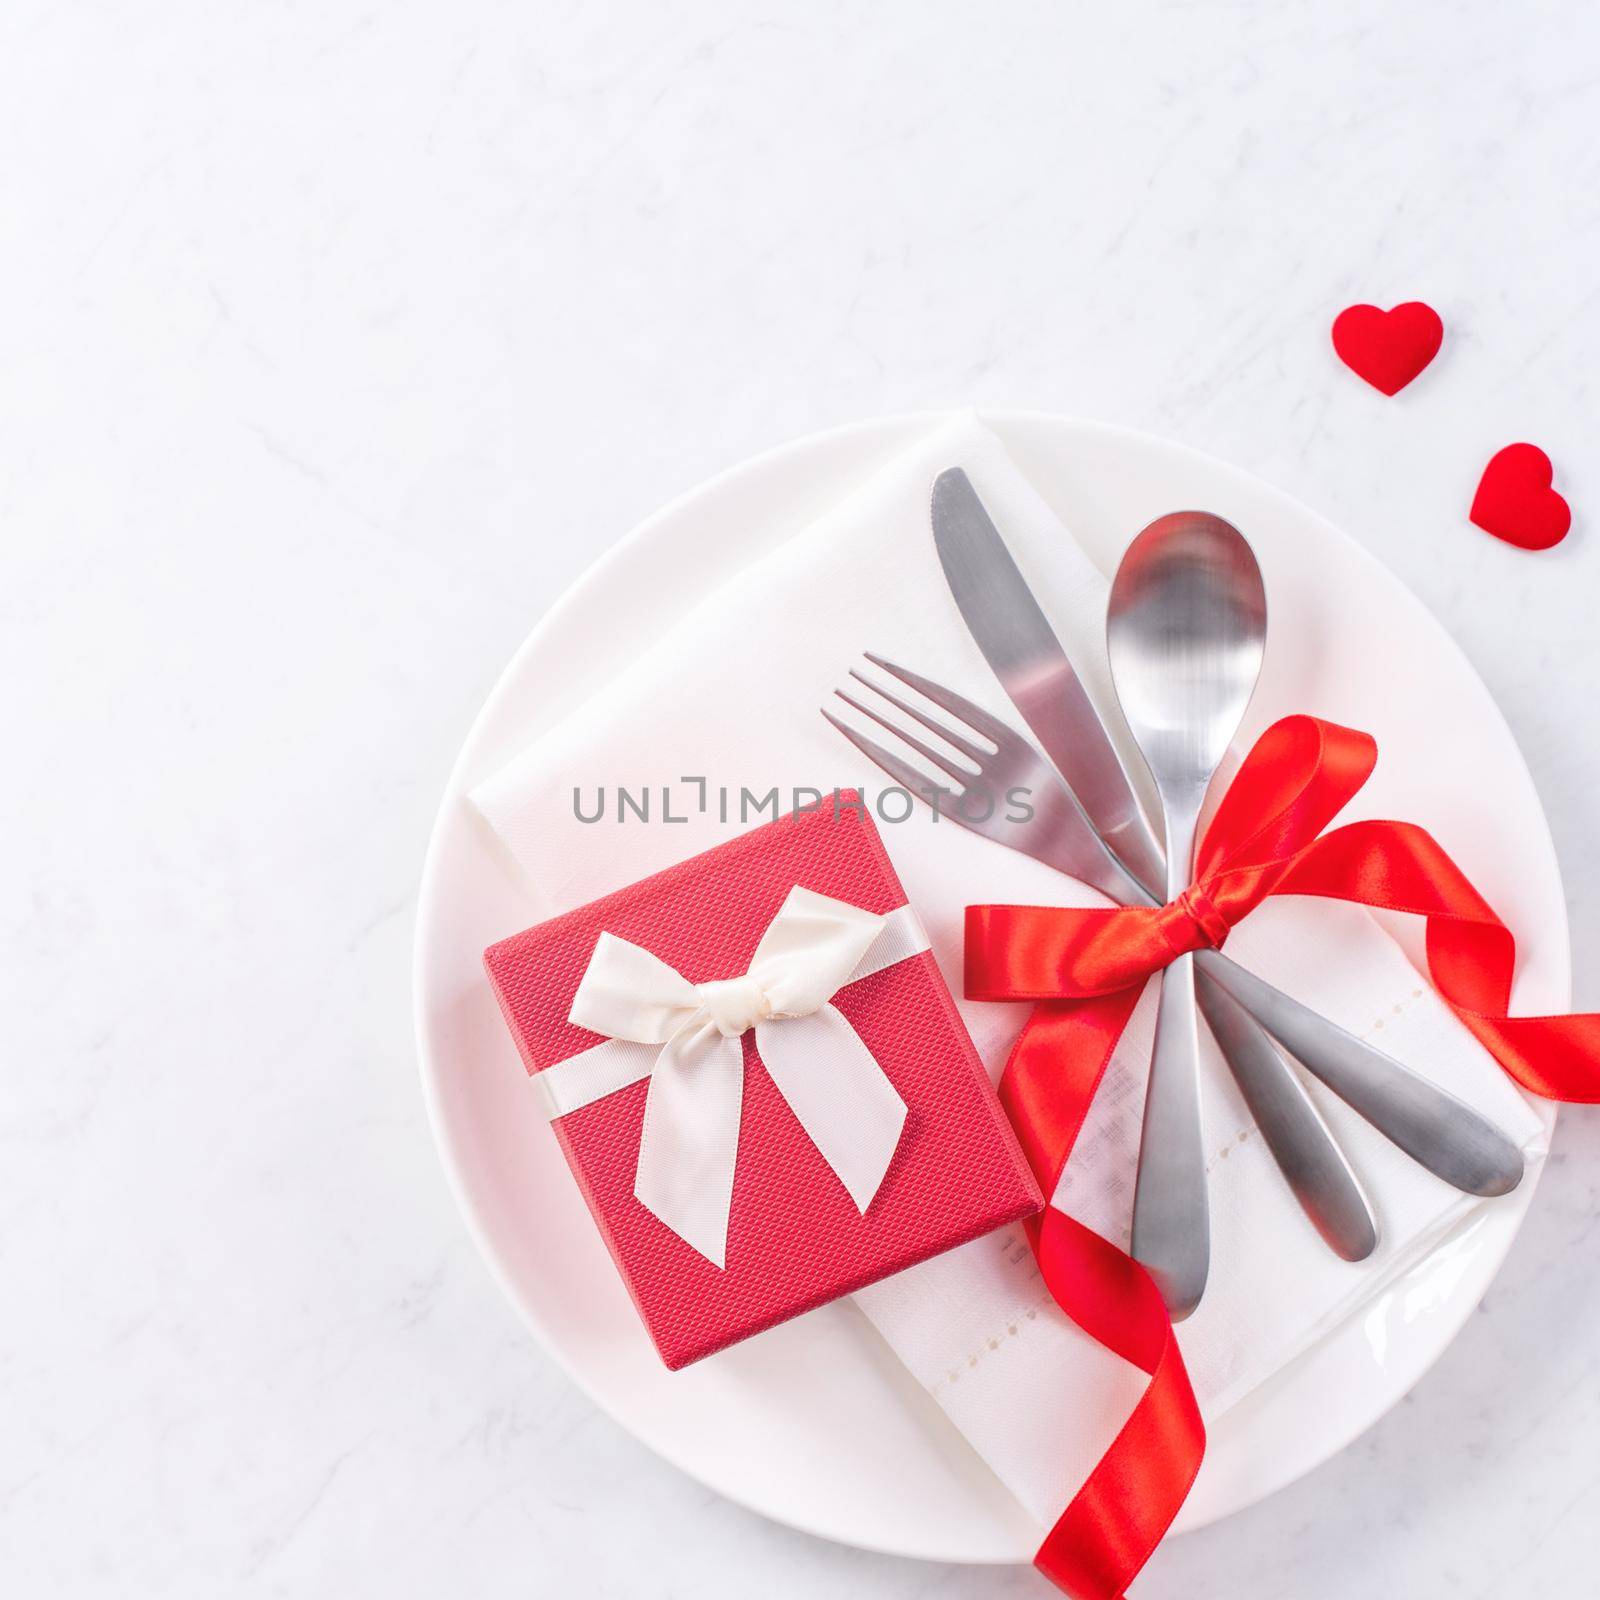 Valentine's Day, Mother's Day, holiday dating meal, banquet design concept - White plate and red ribbon on marble background, top view, flat lay.